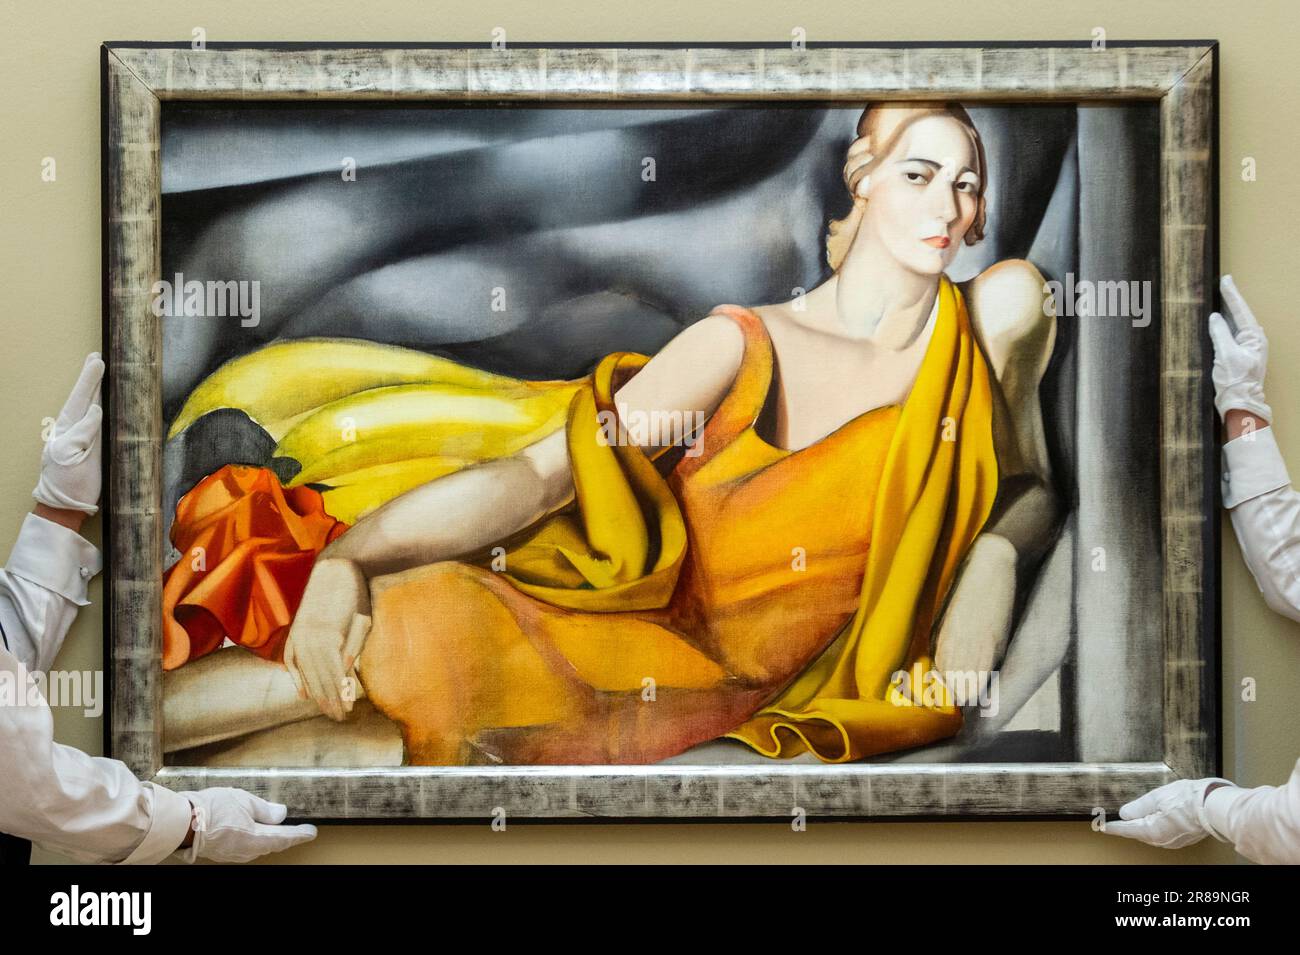 London, UK.  20 June 2023. Technicians present ‘Femme à la robe jaune’, 1929, by Tamara de Lempicka (Est. £2.5-3.5 million) at a preview of highlights from Sotheby’s summer sales.  The works will be auctioned at the Now and Modern & Contemporary Evening Auctions at Sotheby’s New Bond Street galleries on 27 June.  Credit: Stephen Chung / Alamy Live News Stock Photo